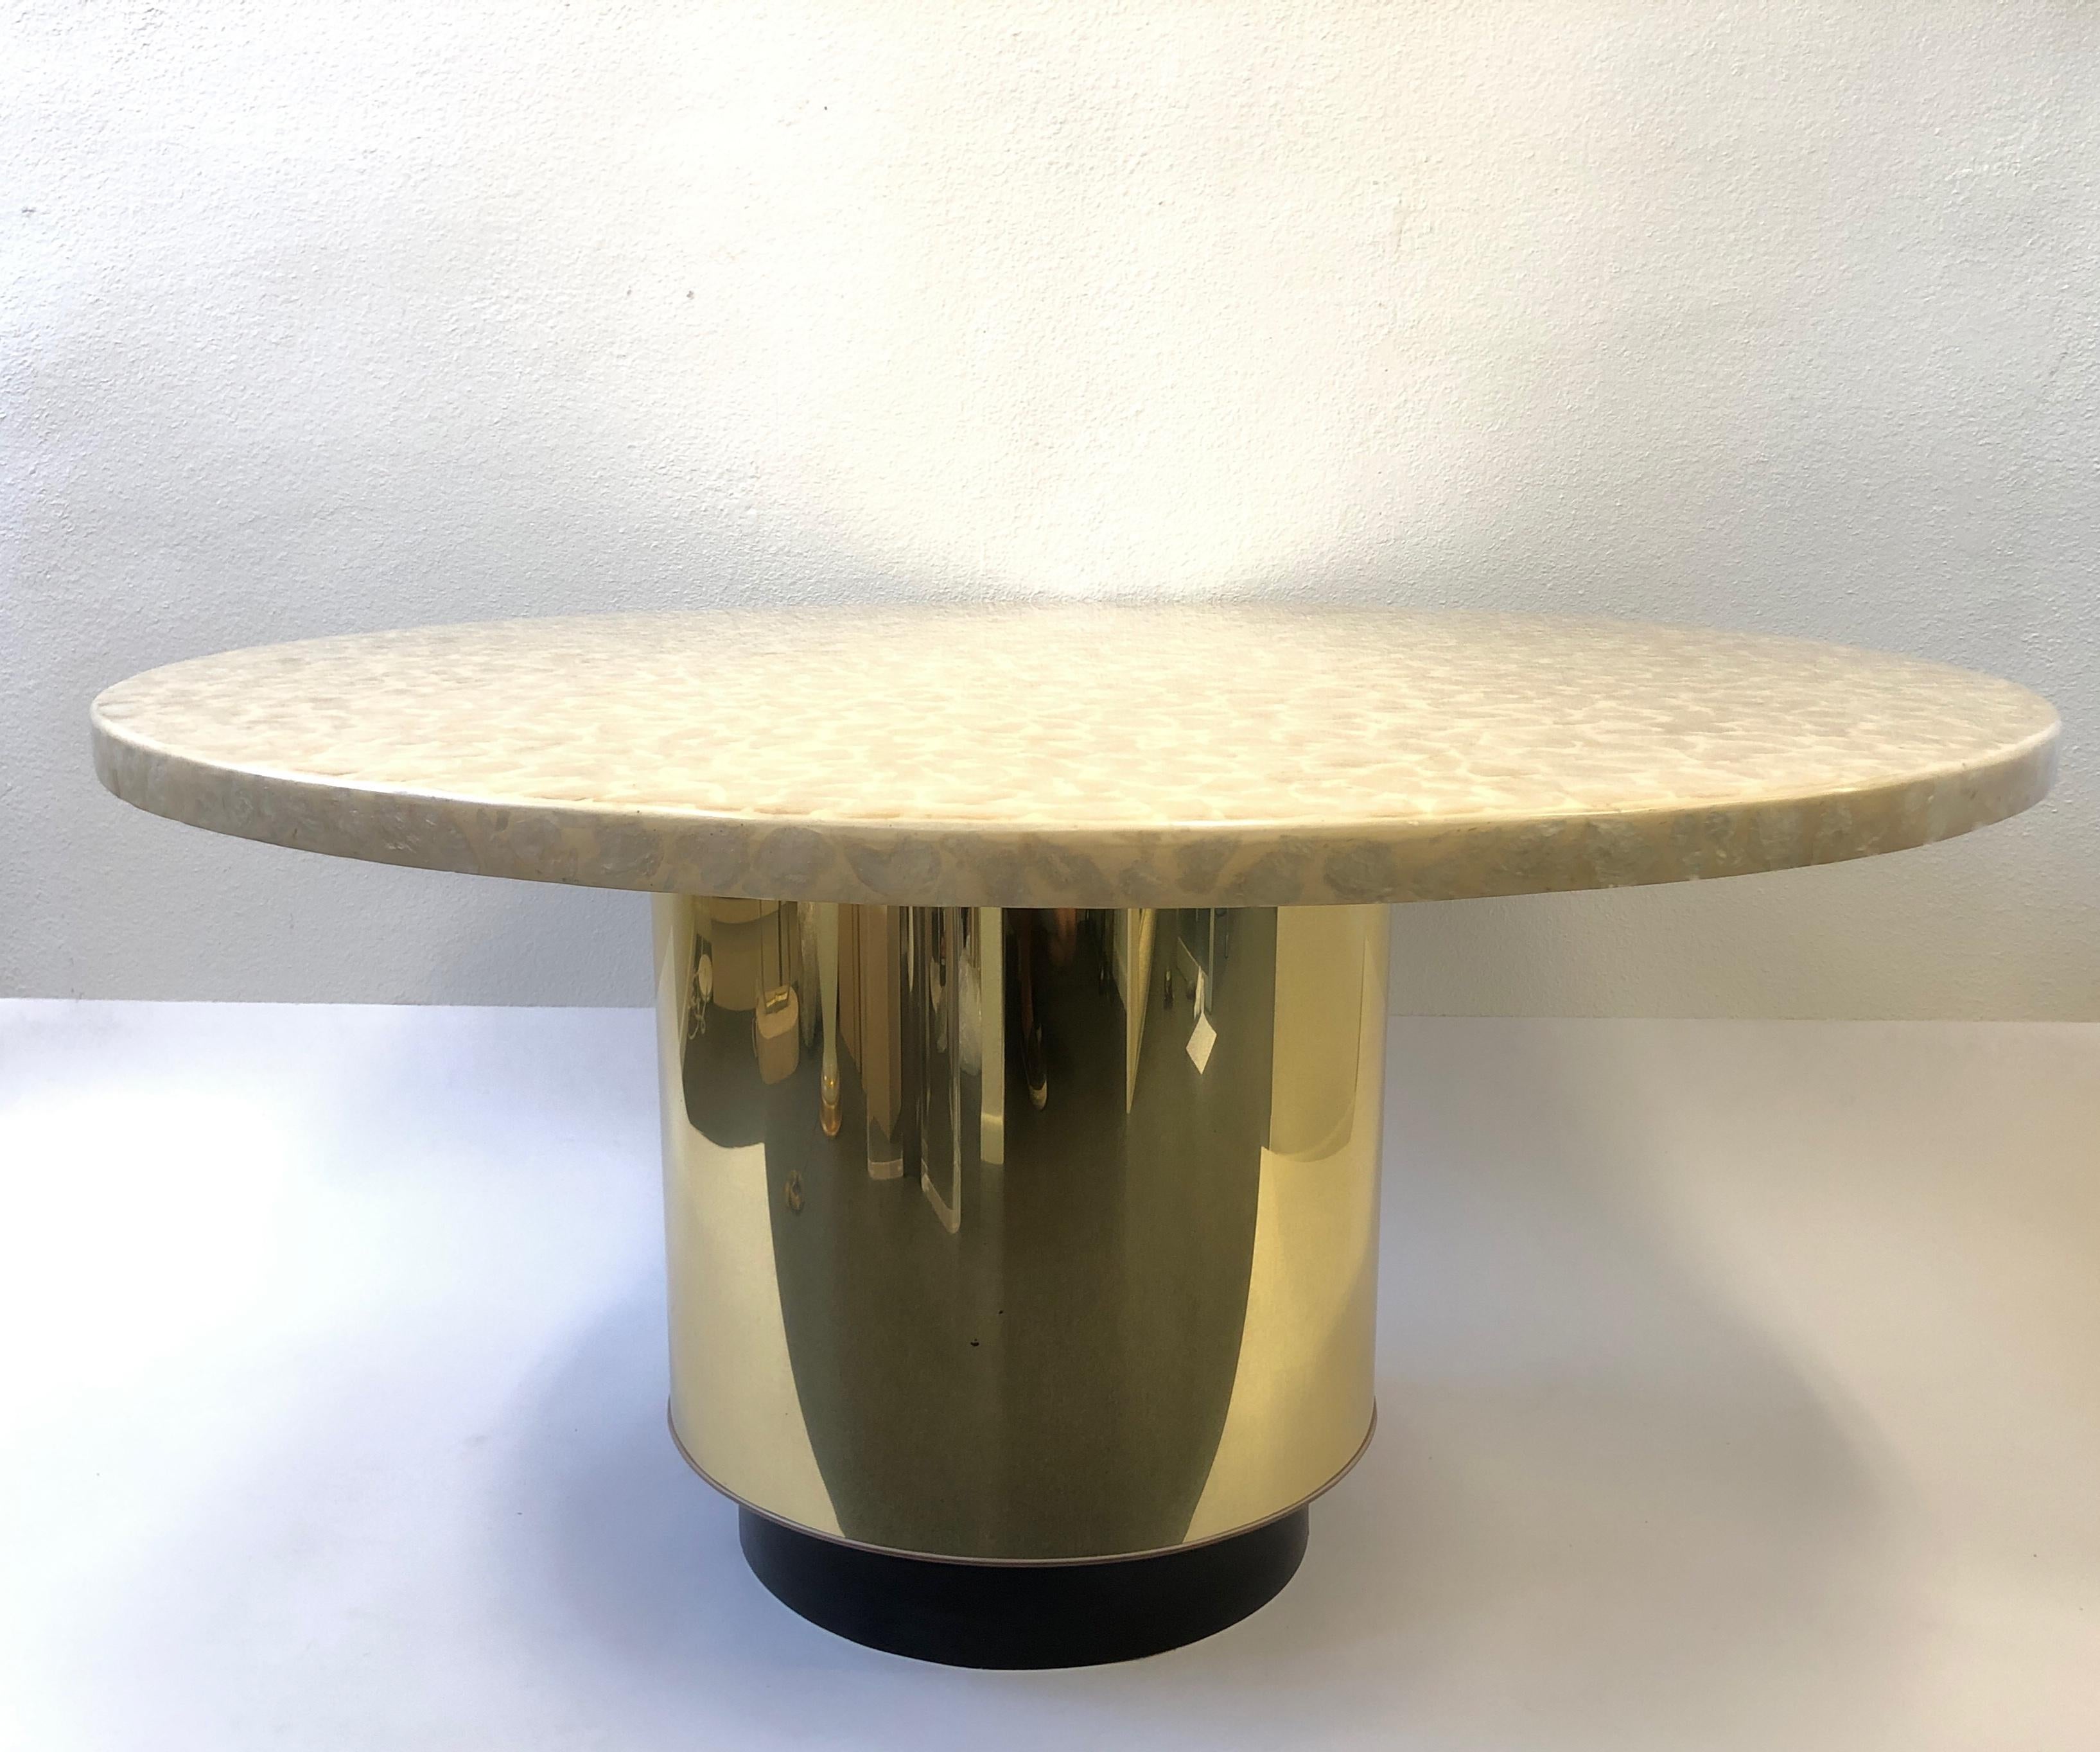 A beautiful 1960s Capiz Shell and polish brass dining table by Arthur Elrod. The table came out of a Arthur Elrod house in Rancho Mirage CA. The table shows minor wear consistent with age(see detail photos). The top is wood covered with capiz shell